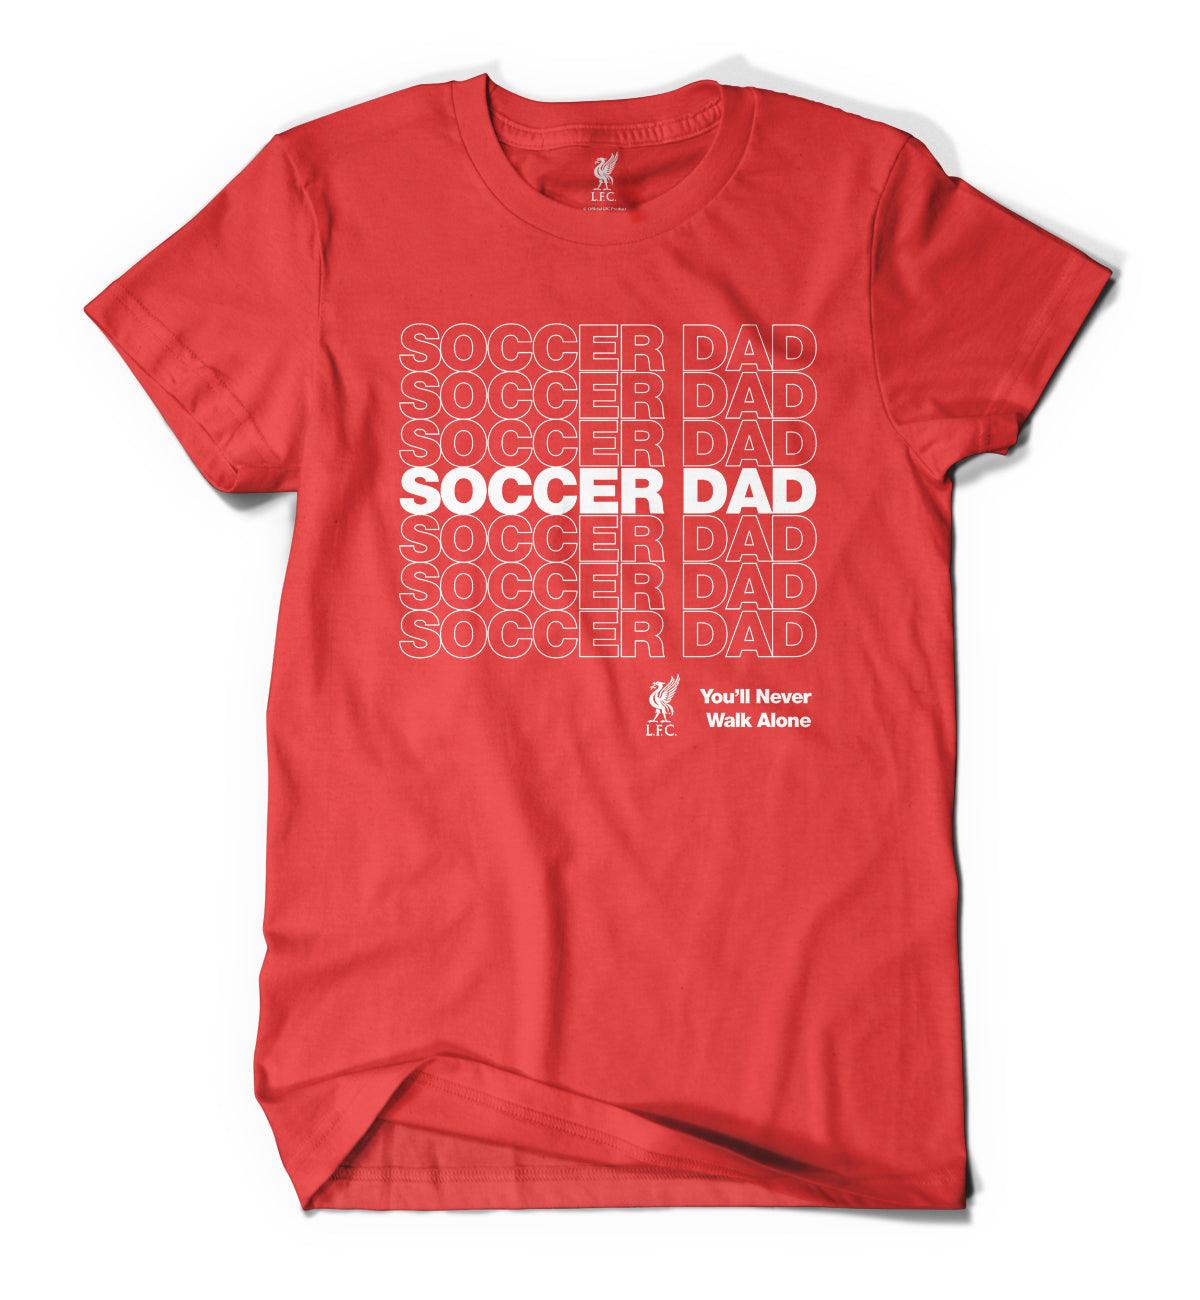 Image of Liverpool FC Soccer Dad Unisex Red 100% Cotton T-Shirt